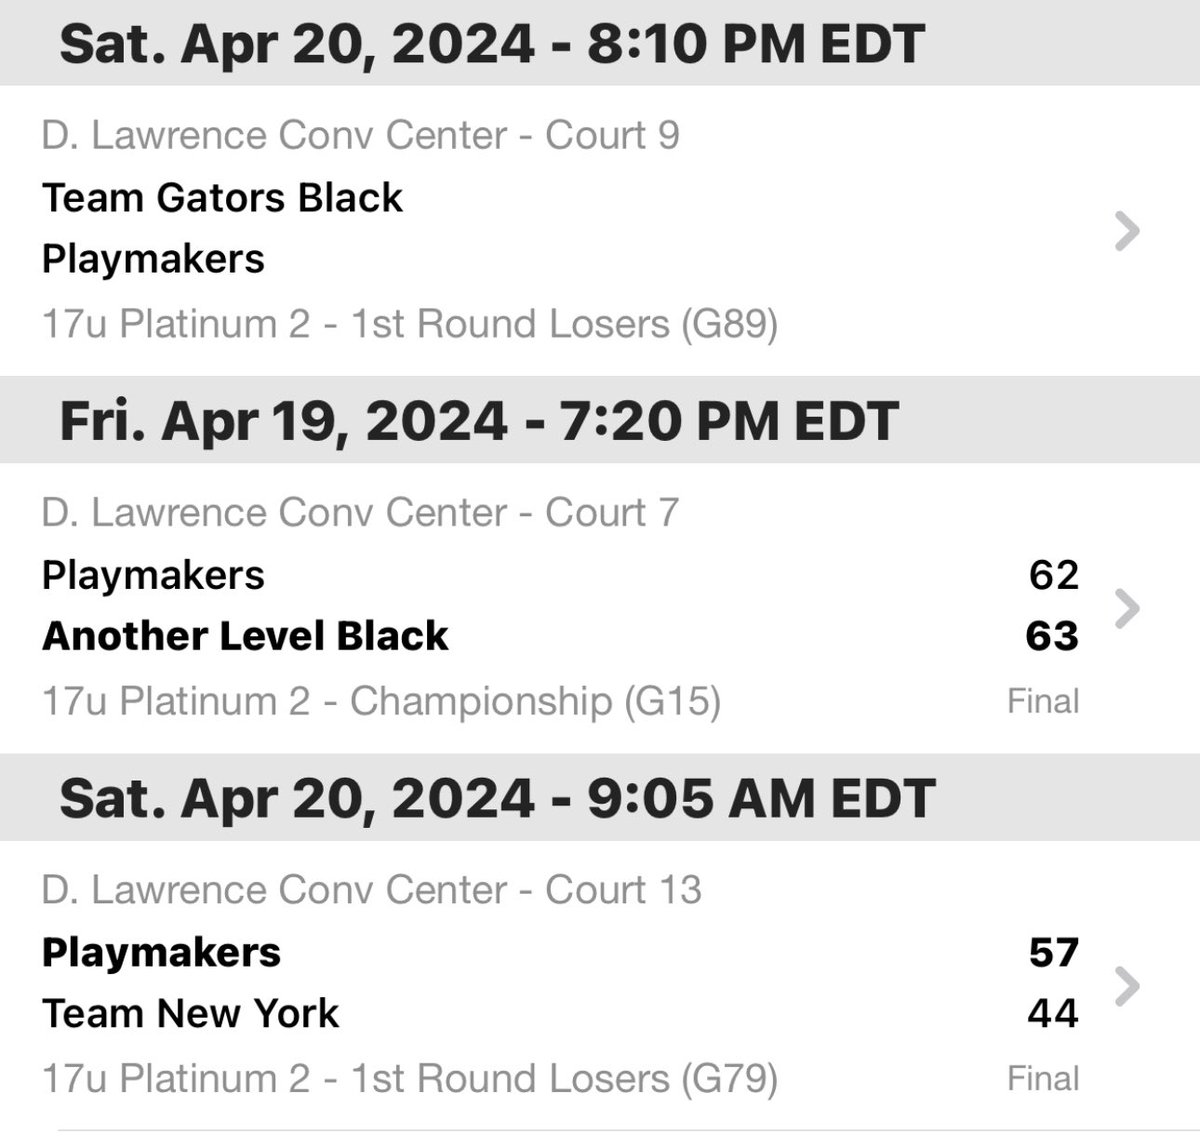 17u back in action tonight court 9